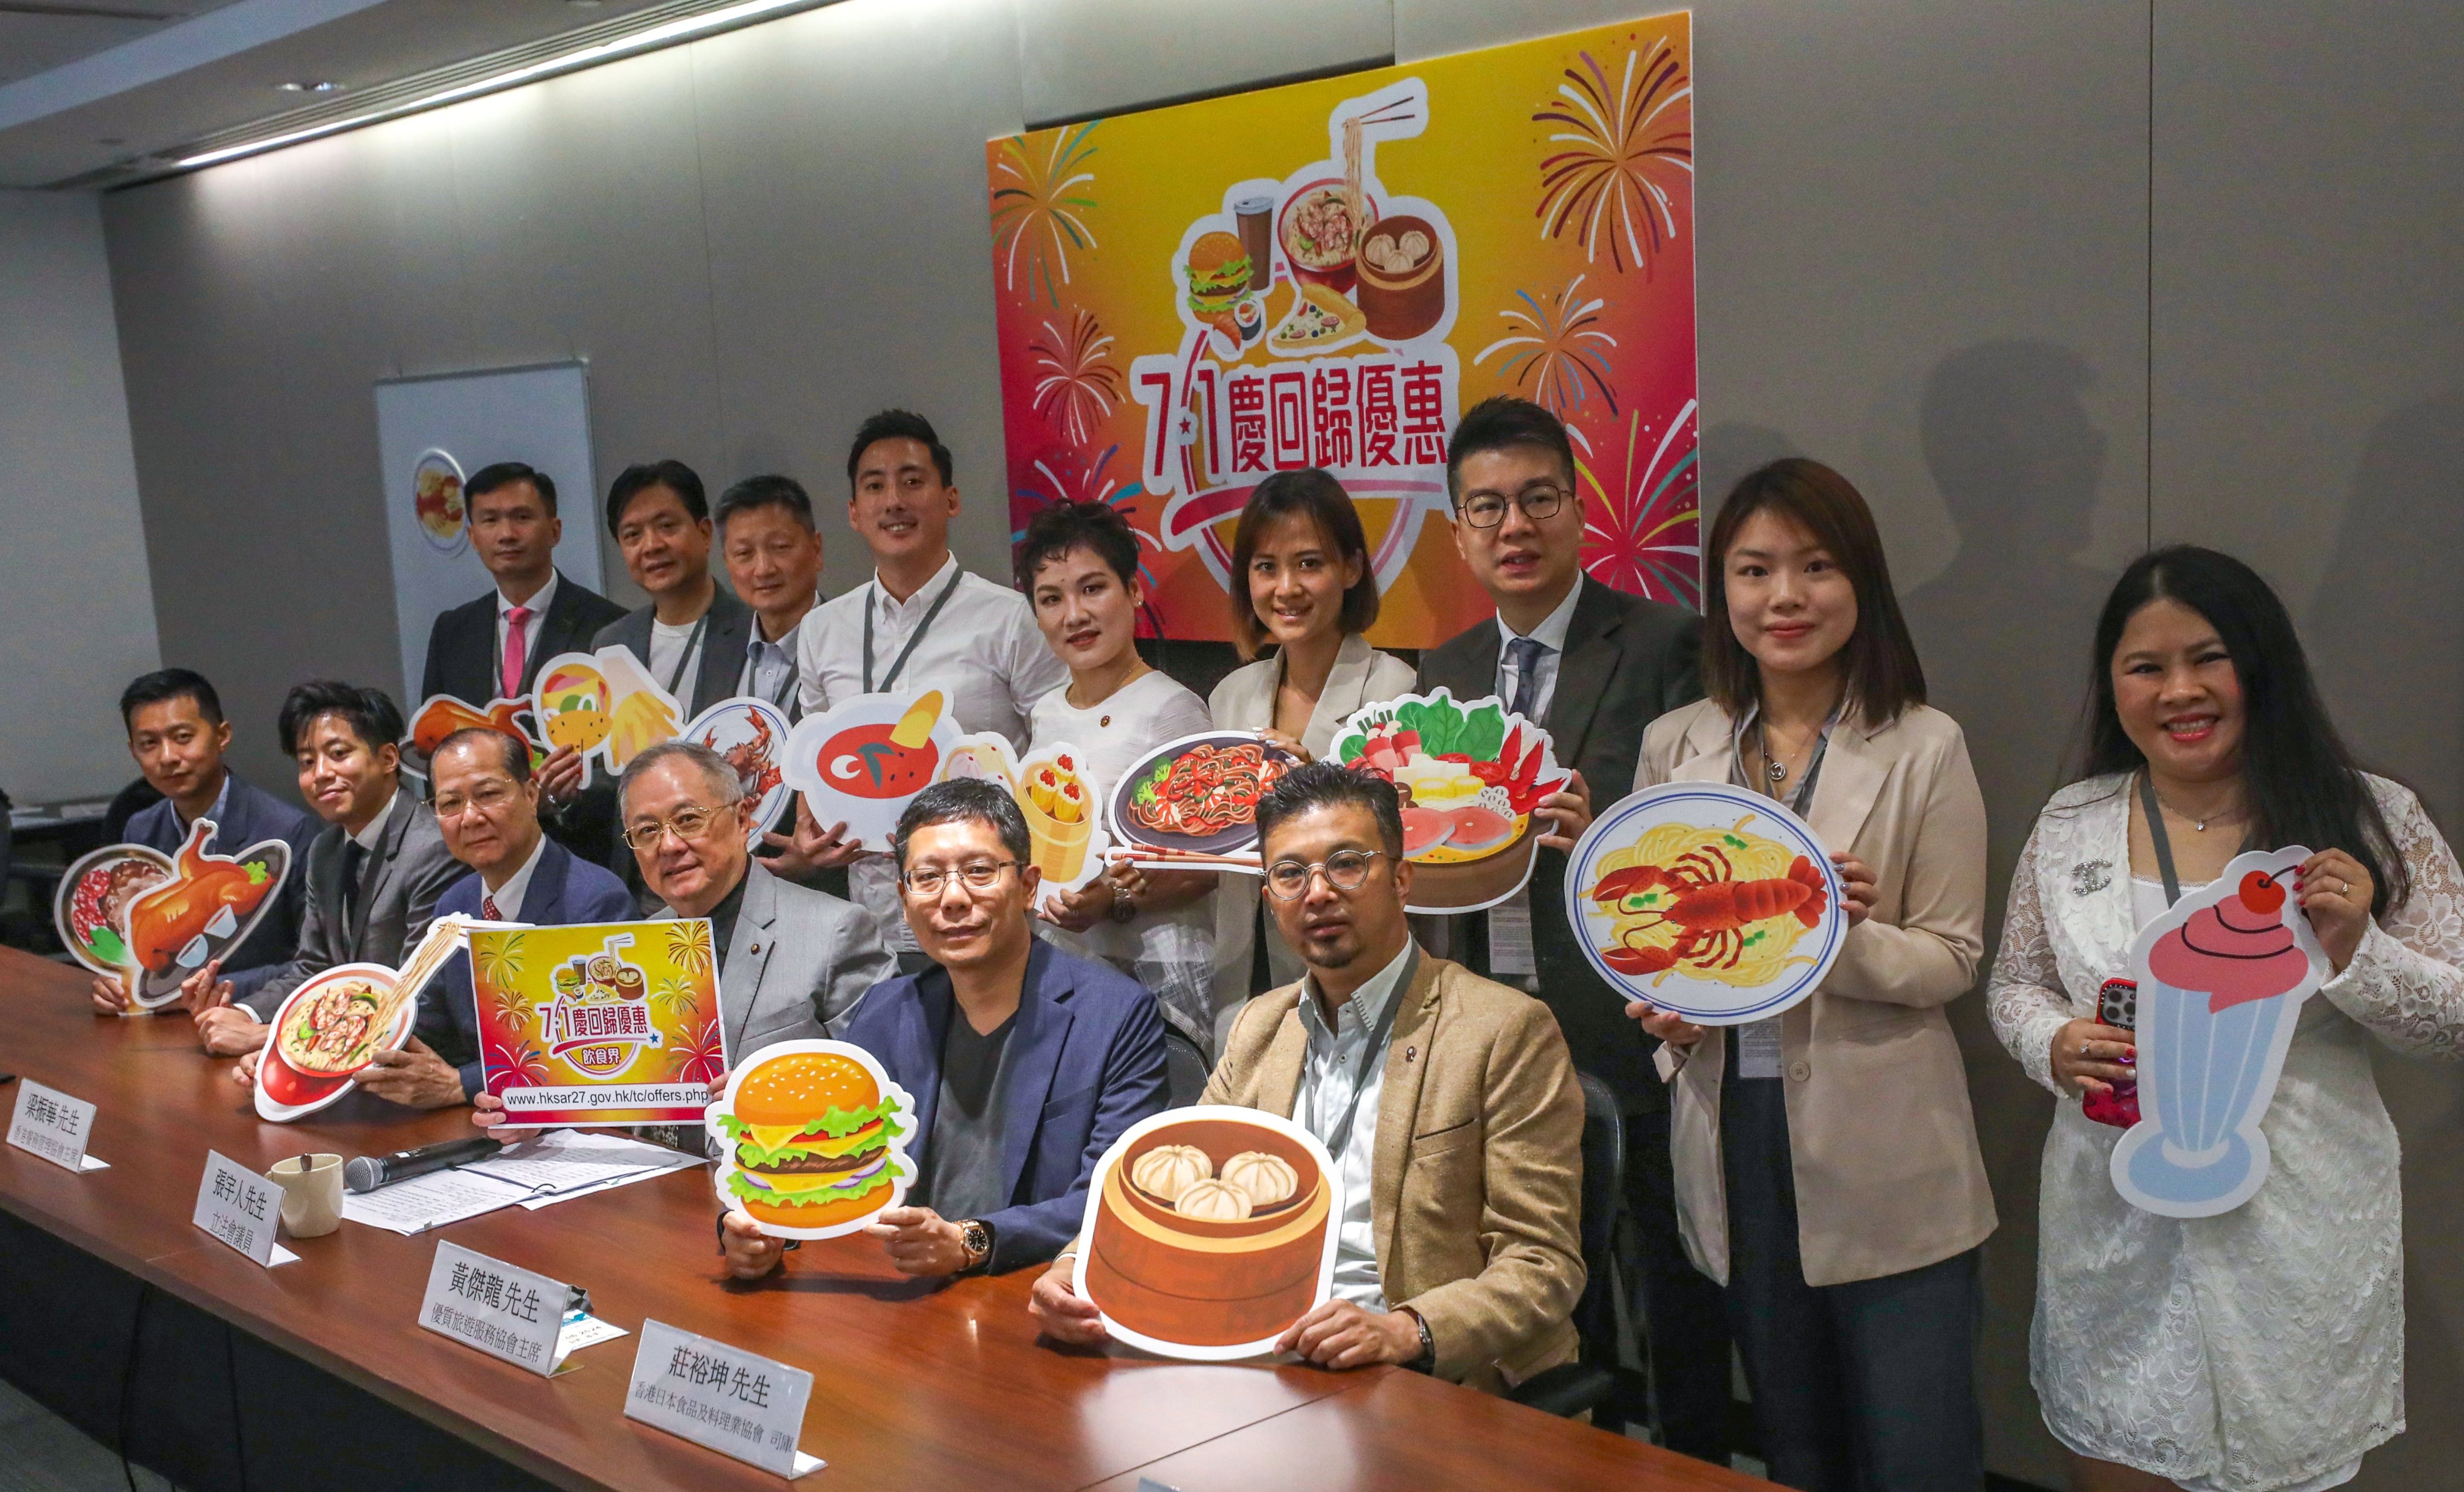 More than 2,000 of restaurants are offering selective deals with prices related to “7” and “1” to mark the date July 1. Photo: Sun Yeung